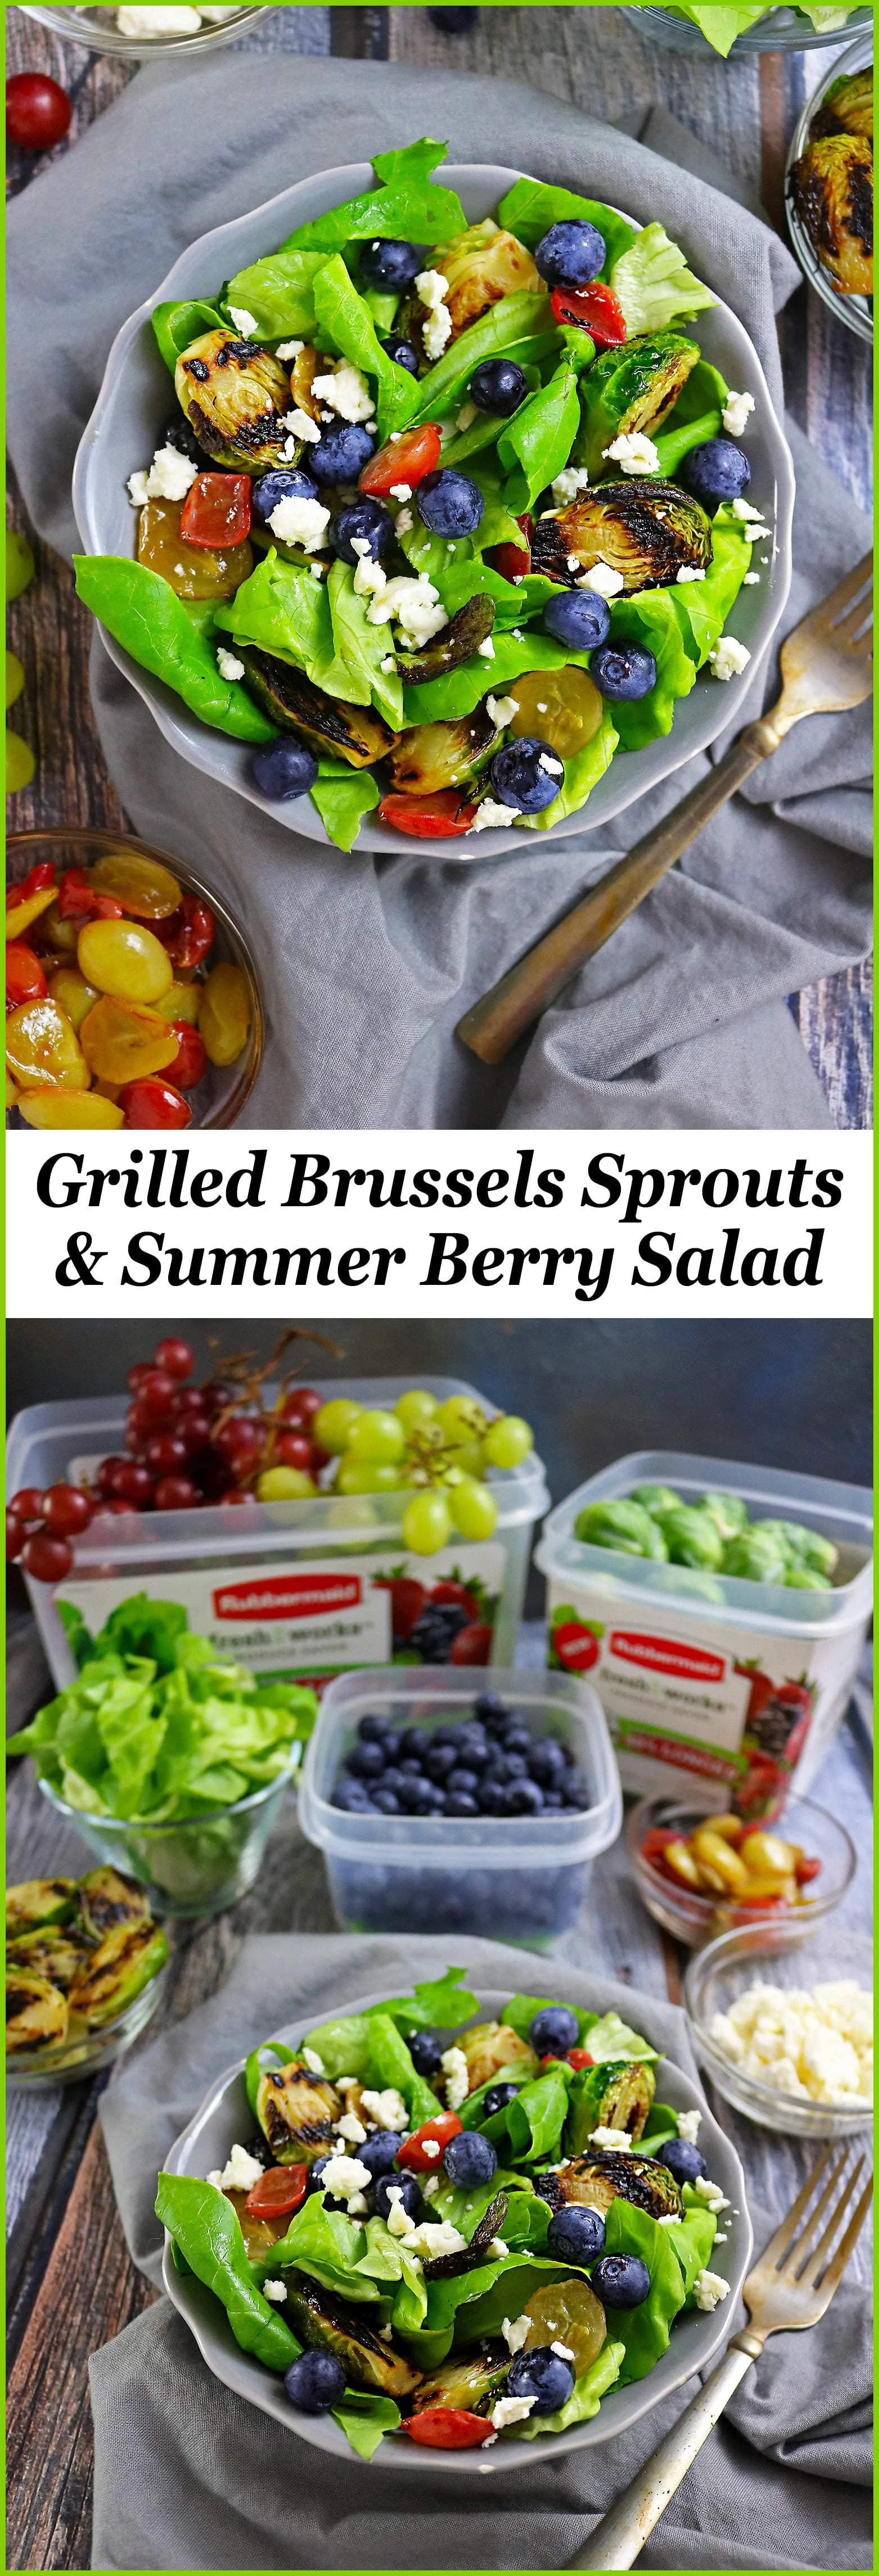 Easy Grilled Brussels Sprouts & Summer Berry Salad #SeeHowFreshWorks #ad